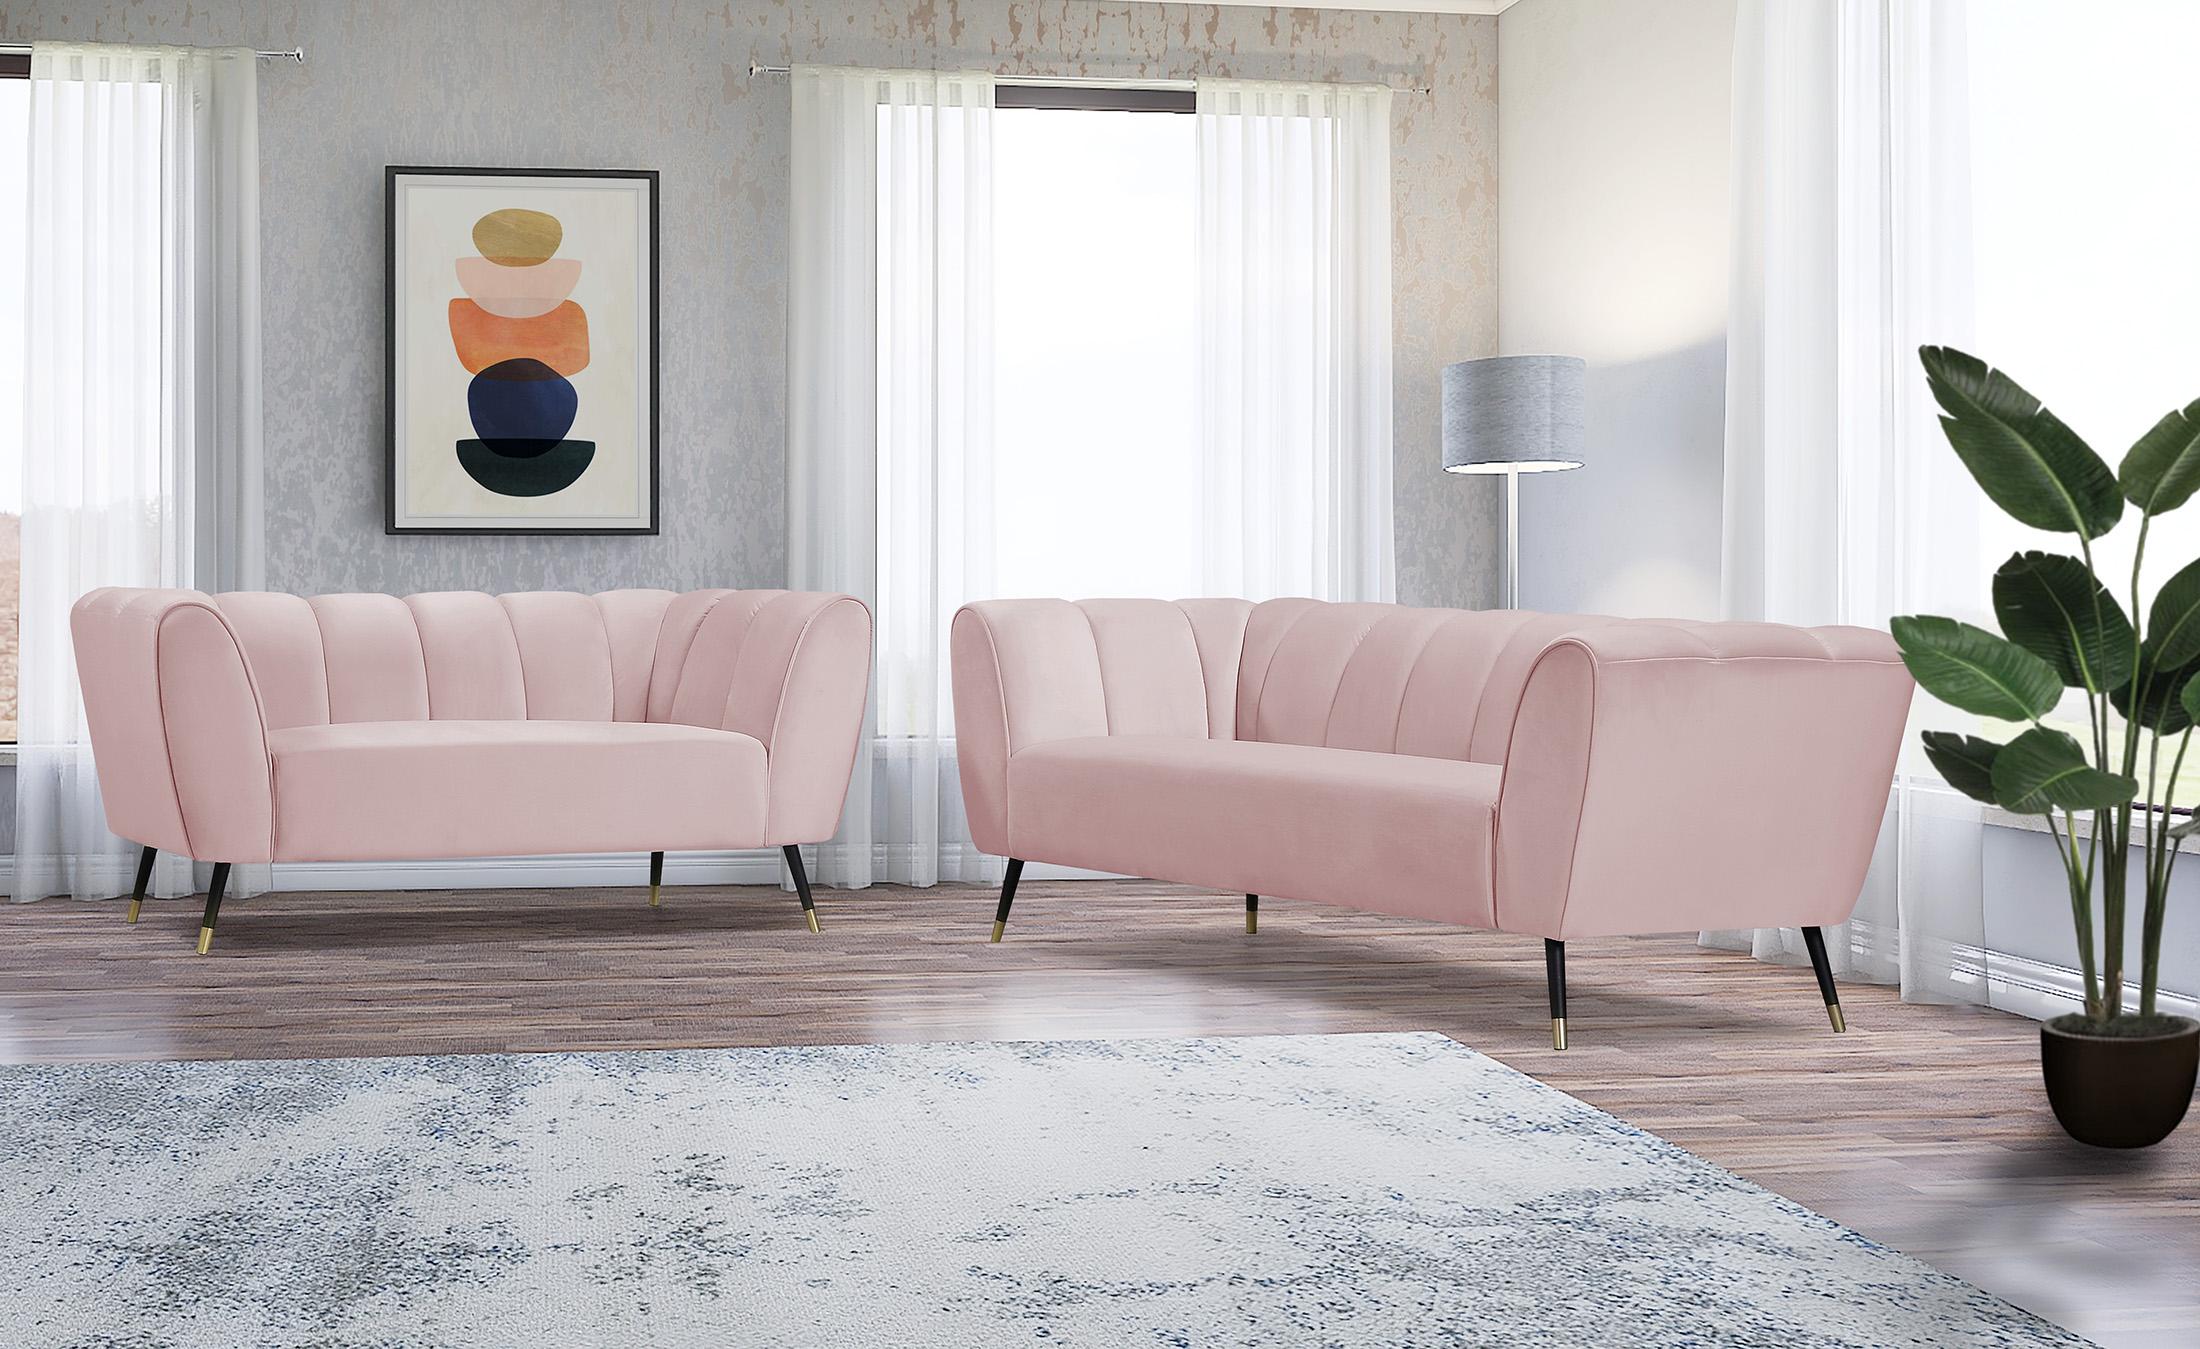 

    
626Pink-S Pink Velvet Channel Tufted Sofa BEAUMONT 626Pink-S Meridian Contemporary Modern
